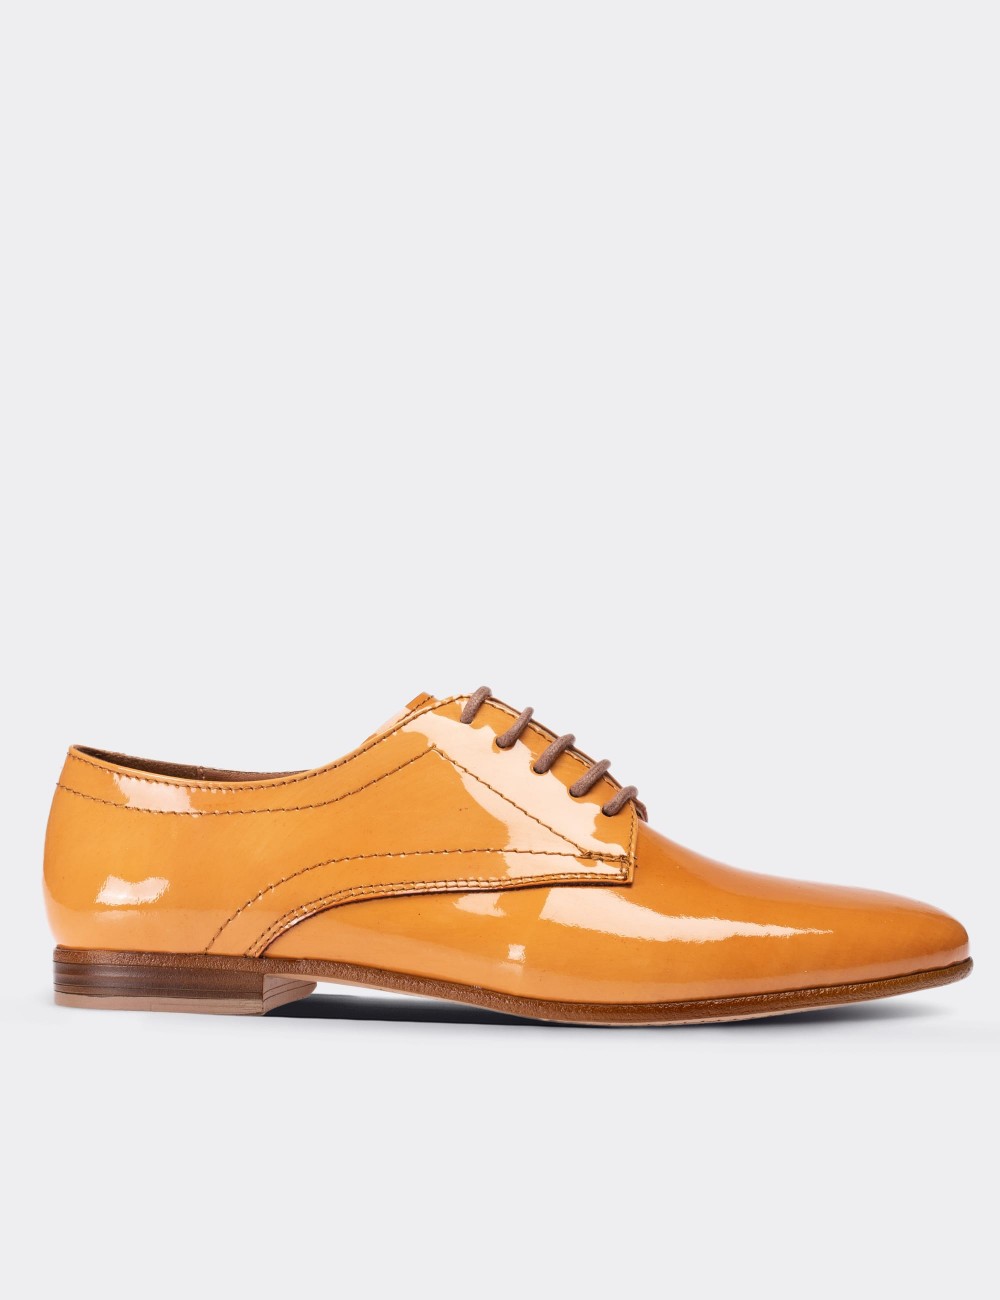 Yellow Patent Leather Lace-up Shoes - 01430ZSRIC01